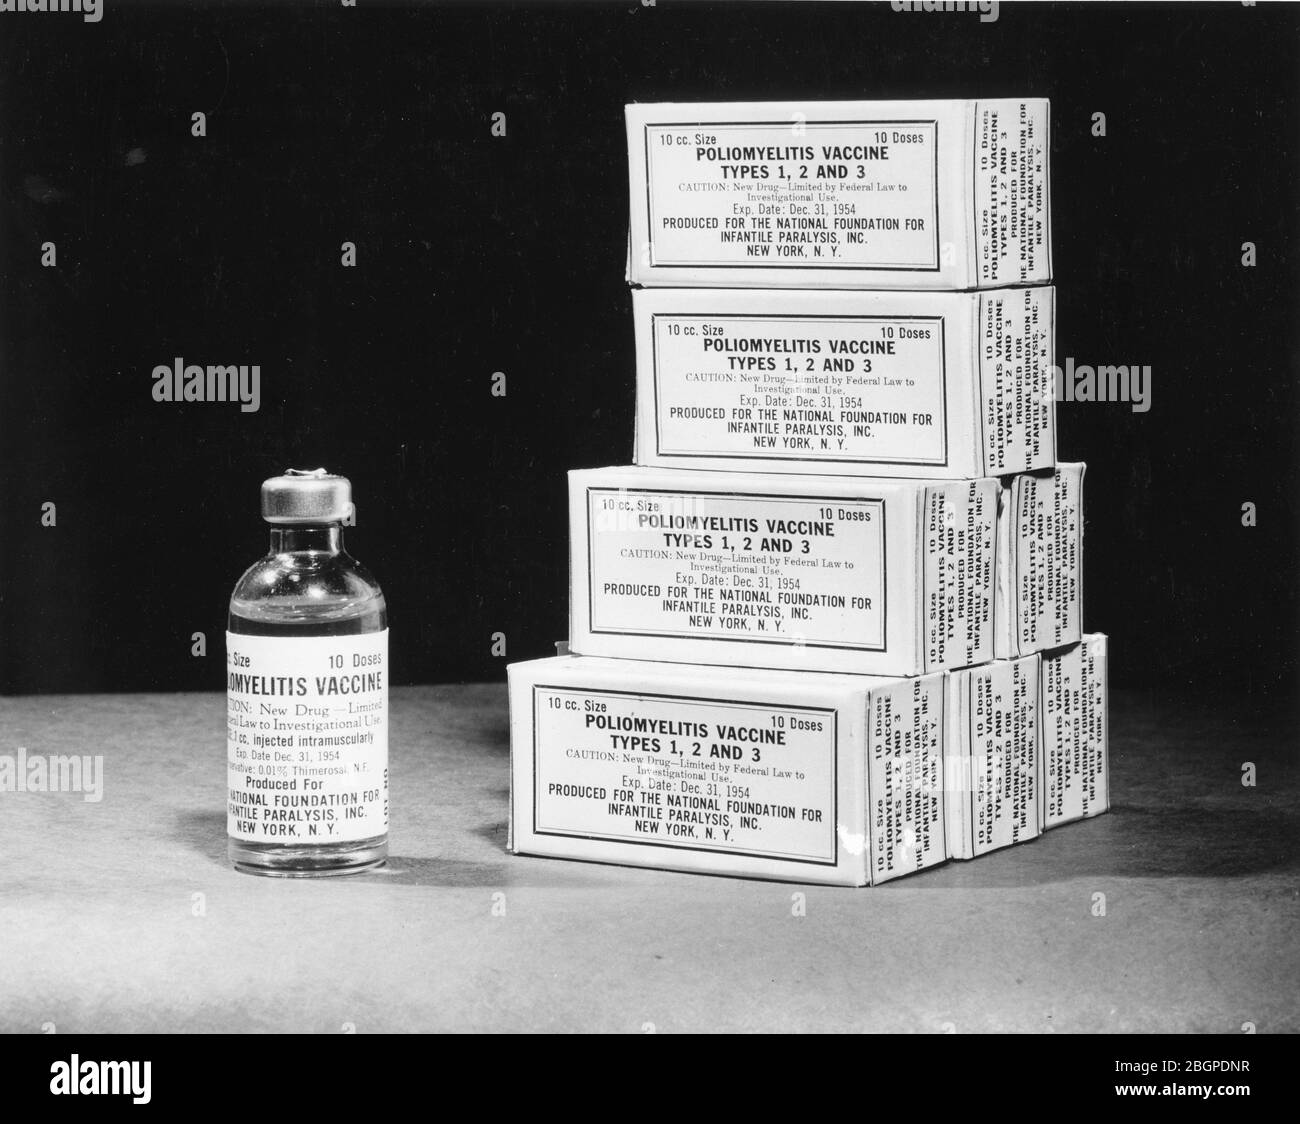 Life-sized photo of the 10-cc polio vaccine bottle which will be used in  field trials against the deadly disease. The bottle contains enough vaccine to give ten school children their first 1-cc shot. Washington, DC, 1954. Photo by National Foundation for Infantile Paralysis. Stock Photo